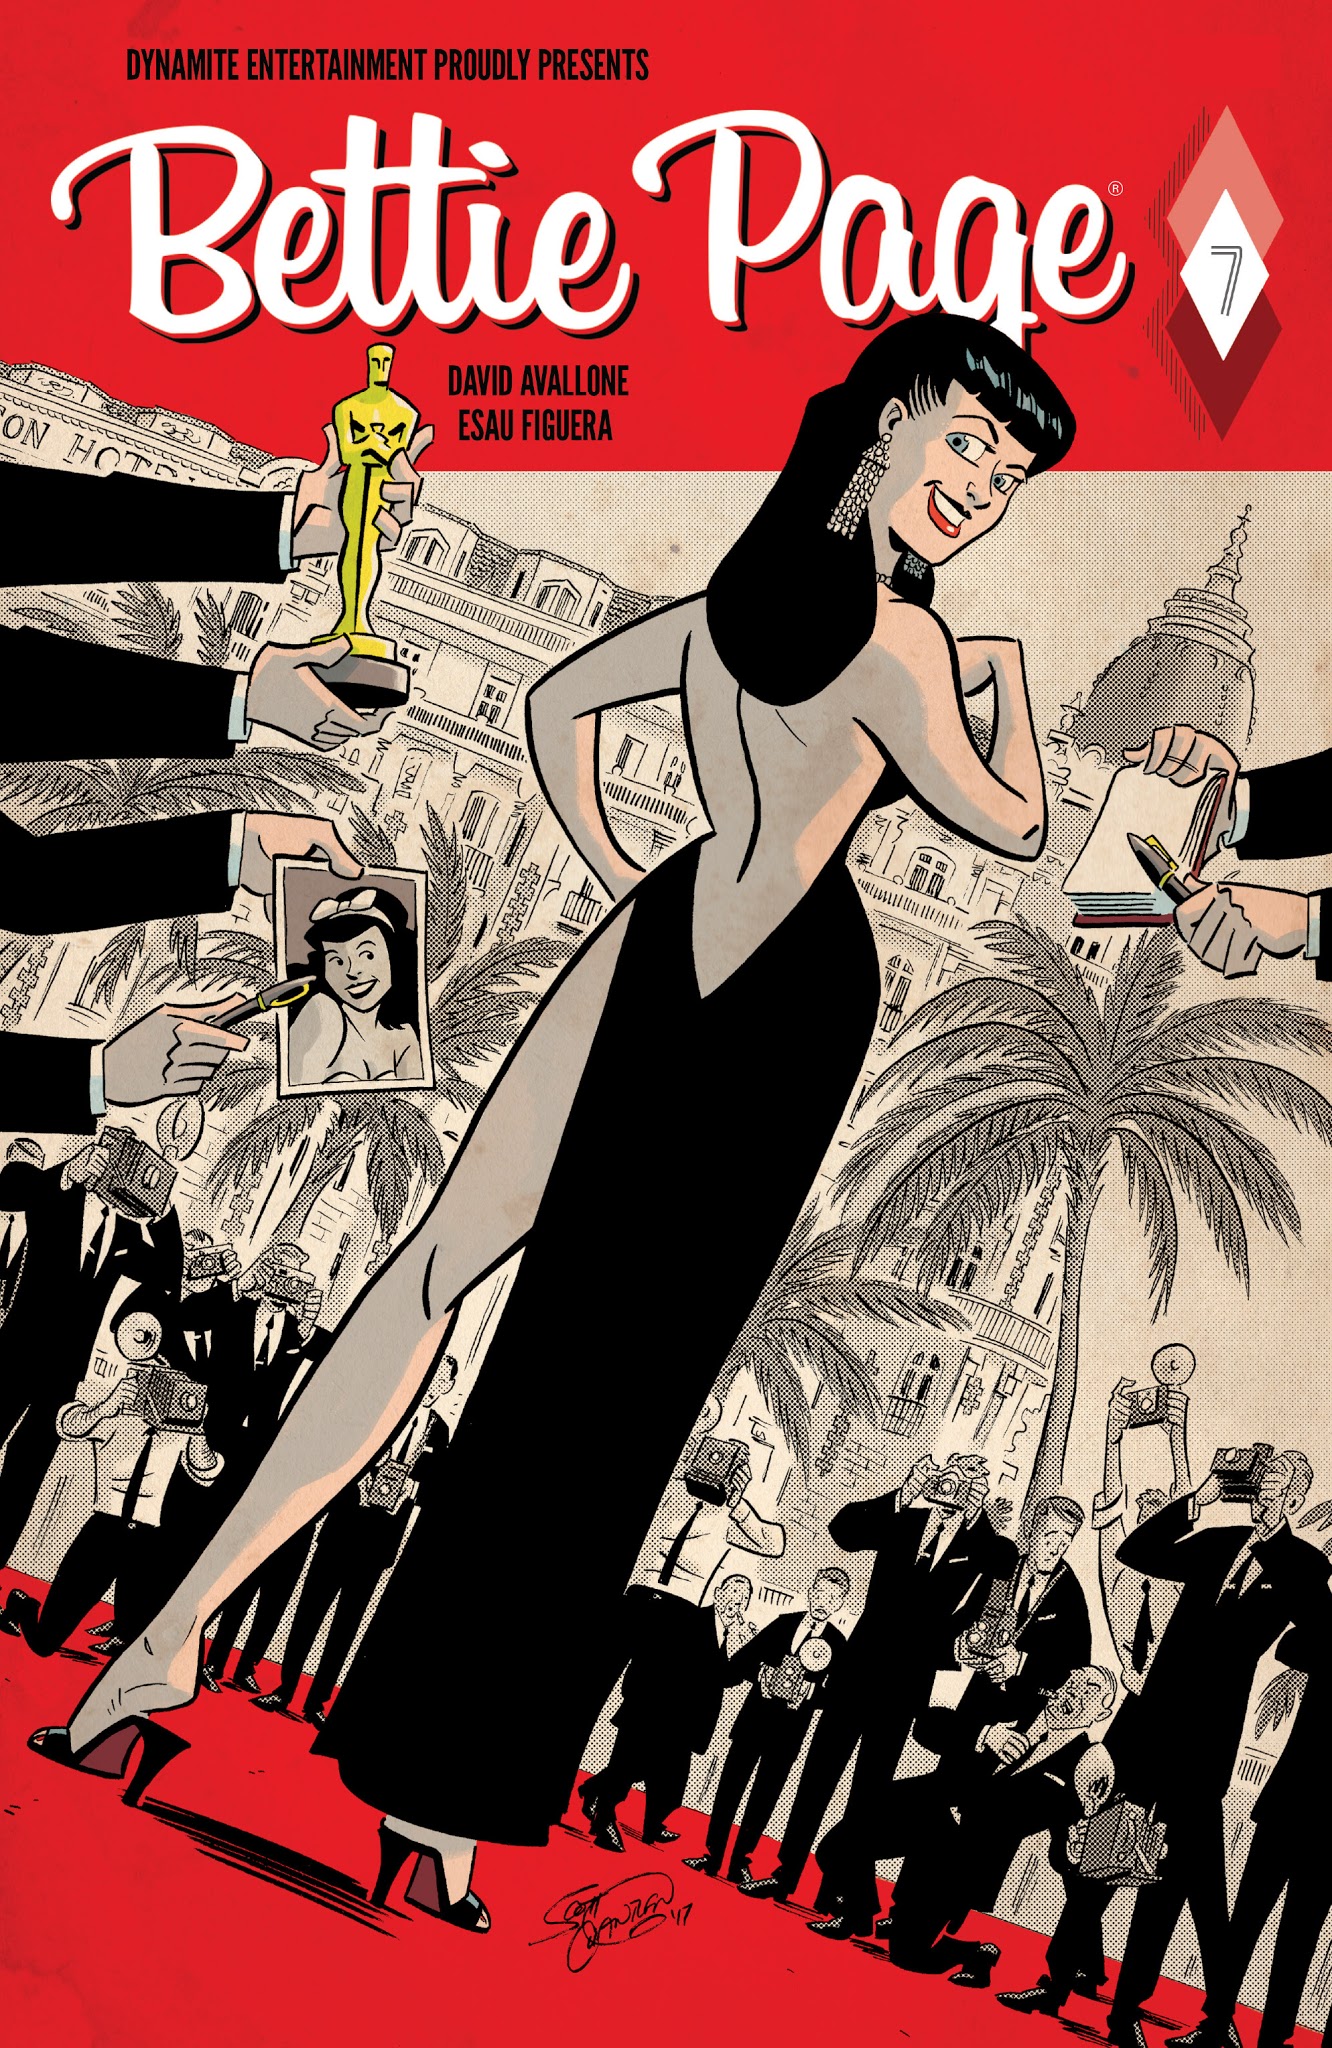 Read online Bettie Page comic -  Issue #7 - 2